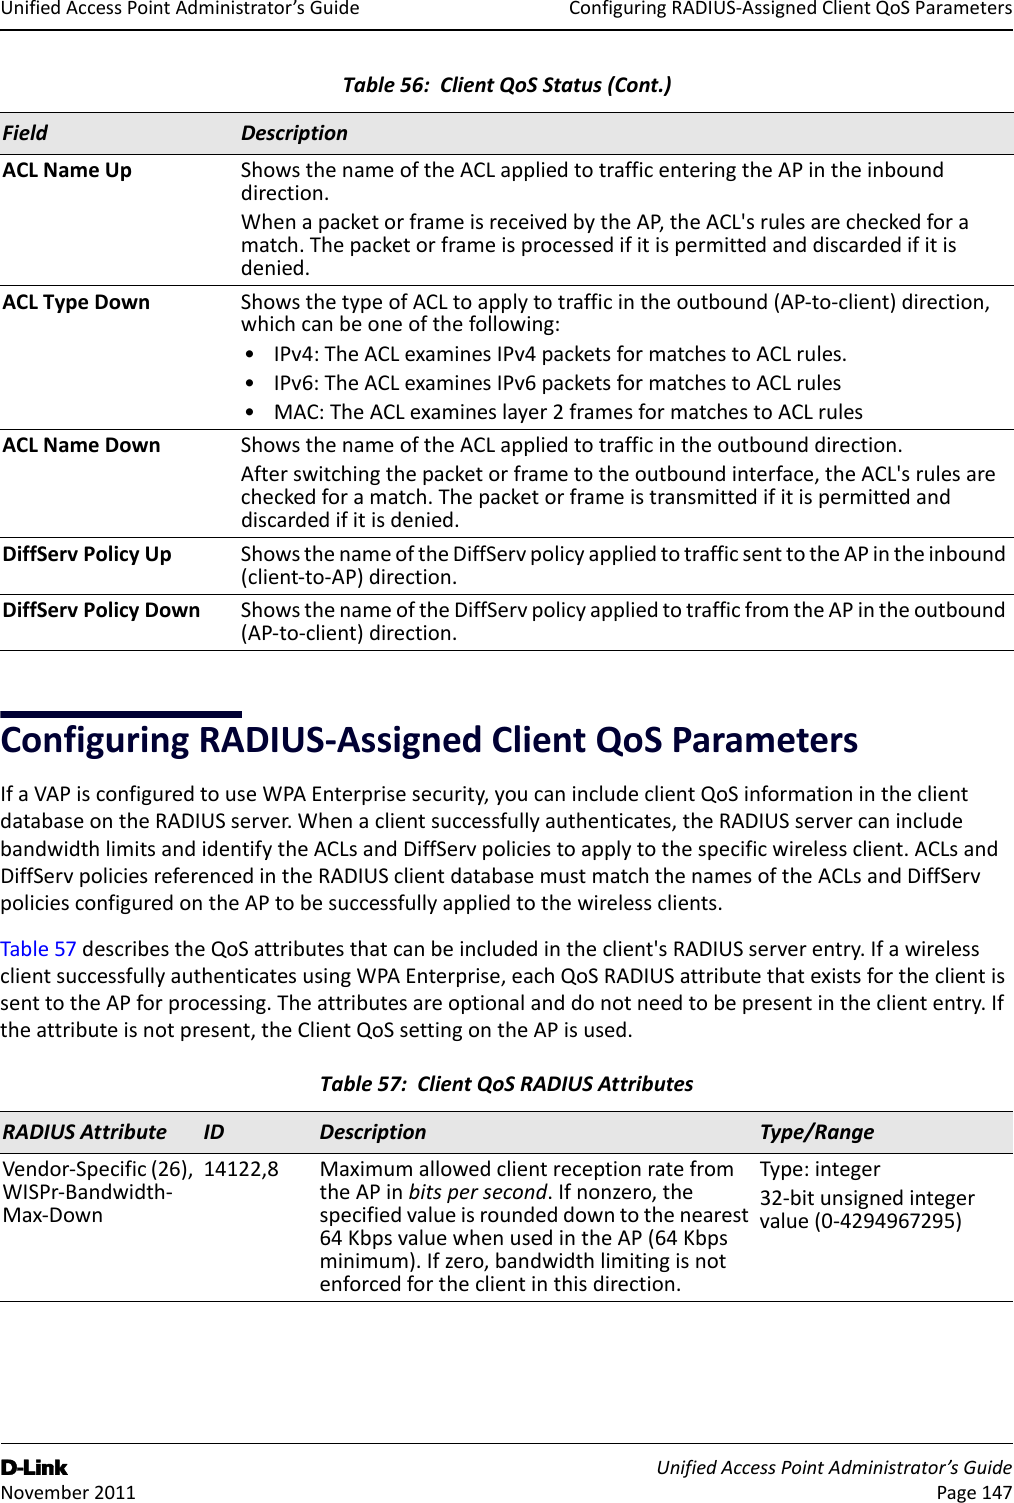 ConfiguringRADIUS‐AssignedClientQoSParametersD-Link UnifiedAccessPointAdministrator’sGuide November2011 Page147UnifiedAccessPointAdministrator’sGuideConfiguringRADIUS‐AssignedClientQoSParametersIfaVAPisconfiguredtouseWPAEnterprisesecurity,youcanincludeclientQoSinformationintheclientdatabaseontheRADIUSserver.Whenaclientsuccessfullyauthenticates,theRADIUSservercanincludebandwidthlimitsandidentifytheACLsandDiffServpoliciestoapplytothespecificwirelessclient.ACLsandDiffServpoliciesreferencedintheRADIUSclientdatabasemustmatchthenamesoftheACLsandDiffServpoliciesconfiguredontheAPtobesuccessfullyappliedtothewirelessclients.Table57describestheQoSattributesthatcanbeincludedintheclient&apos;sRADIUSserverentry.IfawirelessclientsuccessfullyauthenticatesusingWPAEnterprise,eachQoSRADIUSattributethatexistsfortheclientissenttotheAPforprocessing.Theattributesareoptionalanddonotneedtobepresentinthecliententry.Iftheattributeisnotpresent,theClientQoSsettingontheAPisused.ACLNameUp ShowsthenameoftheACLappliedtotrafficenteringtheAPintheinbounddirection.WhenapacketorframeisreceivedbytheAP,theACL&apos;srulesarecheckedforamatch.Thepacketorframeisprocessedifitispermittedanddiscardedifitisdenied.ACLTypeDown ShowsthetypeofACLtoapplytotrafficintheoutbound(AP‐to‐client)direction,whichcanbeoneofthefollowing:•IPv4:TheACLexaminesIPv4packetsformatchestoACLrules.•IPv6:TheACLexaminesIPv6packetsformatchestoACLrules•MAC:TheACLexamineslayer2framesformatchestoACLrulesACLNameDown ShowsthenameoftheACLappliedtotrafficintheoutbounddirection.Afterswitchingthepacketorframetotheoutboundinterface,theACL&apos;srulesarecheckedforamatch.Thepacketorframeistransmittedifitispermittedanddiscardedifitisdenied.DiffServPolicyUp ShowsthenameoftheDiffServpolicyappliedtotrafficsenttotheAPintheinbound(client‐to‐AP)direction.DiffServPolicyDown ShowsthenameoftheDiffServpolicyappliedtotrafficfromtheAPintheoutbound(AP‐to‐client)direction.Table57:ClientQoSRADIUSAttributesRADIUSAttribute ID Description Type/RangeVendor‐Specific(26),WISPr‐Bandwidth‐Max‐Down14122,8 MaximumallowedclientreceptionratefromtheAPinbitspersecond.Ifnonzero,thespecifiedvalueisroundeddowntothenearest64KbpsvaluewhenusedintheAP(64Kbpsminimum).Ifzero,bandwidthlimitingisnotenforcedfortheclientinthisdirection.Type:integer32‐bitunsignedintegervalue(0‐4294967295)Table56:ClientQoSStatus(Cont.)Field Description